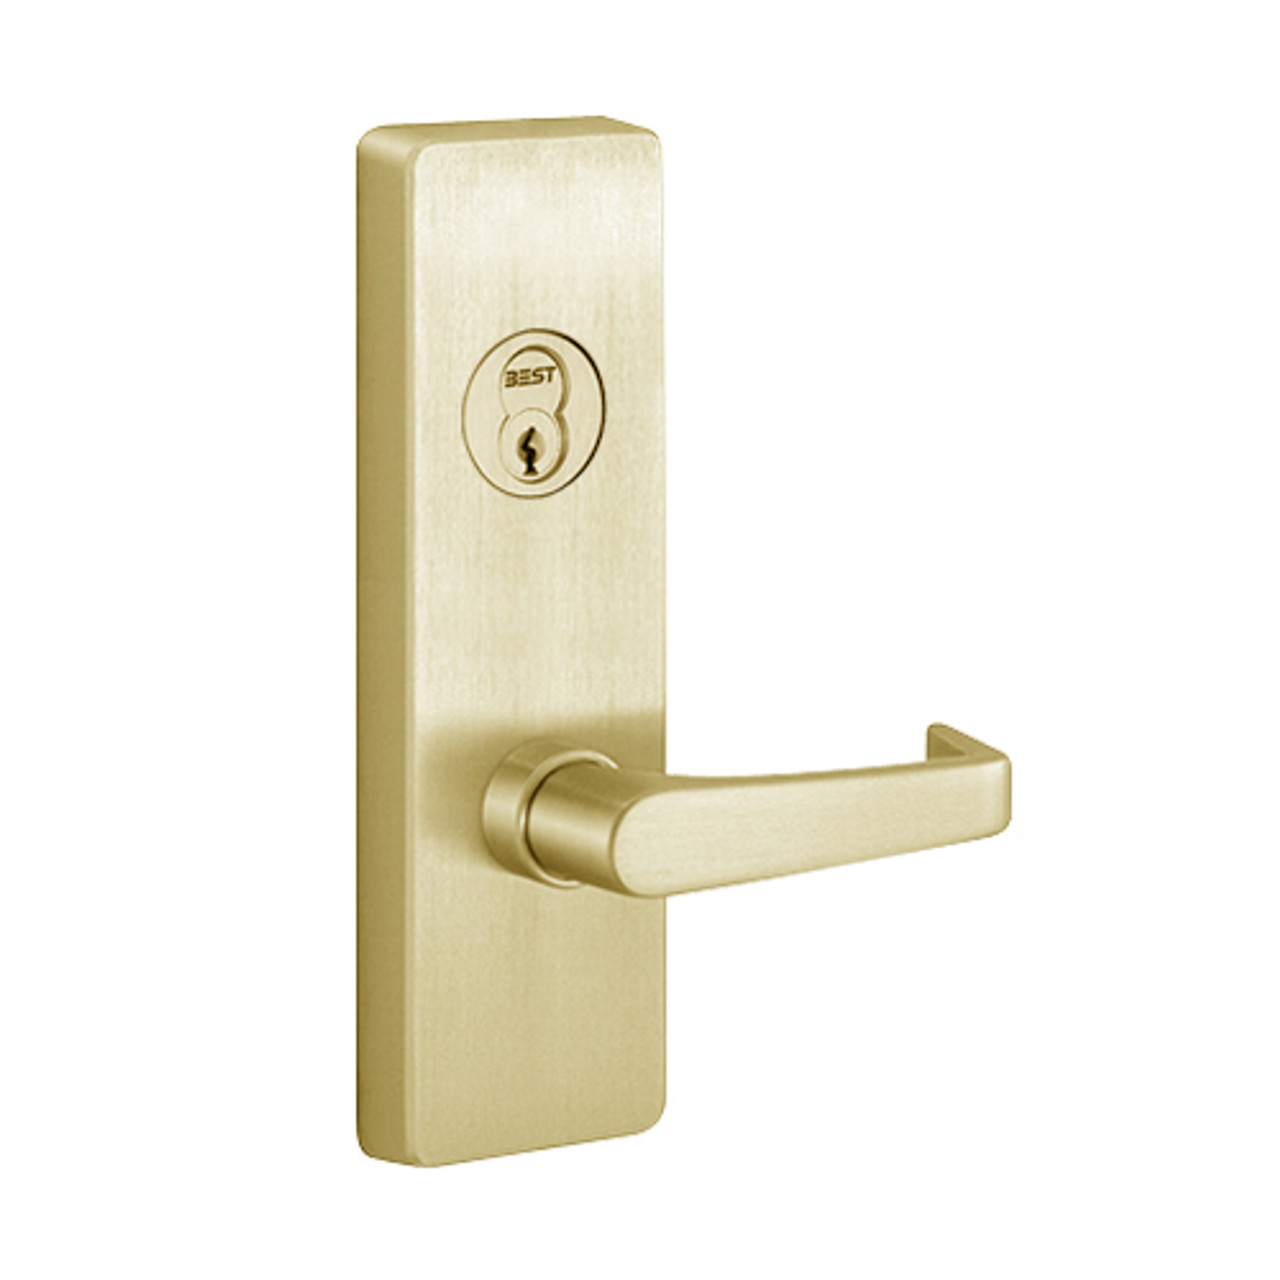 VY4908A-605-RHR PHI Key Controls Lever Vandal Resistant Trim with A Lever Design for Olympian Series Exit Device in Bright Brass Finish